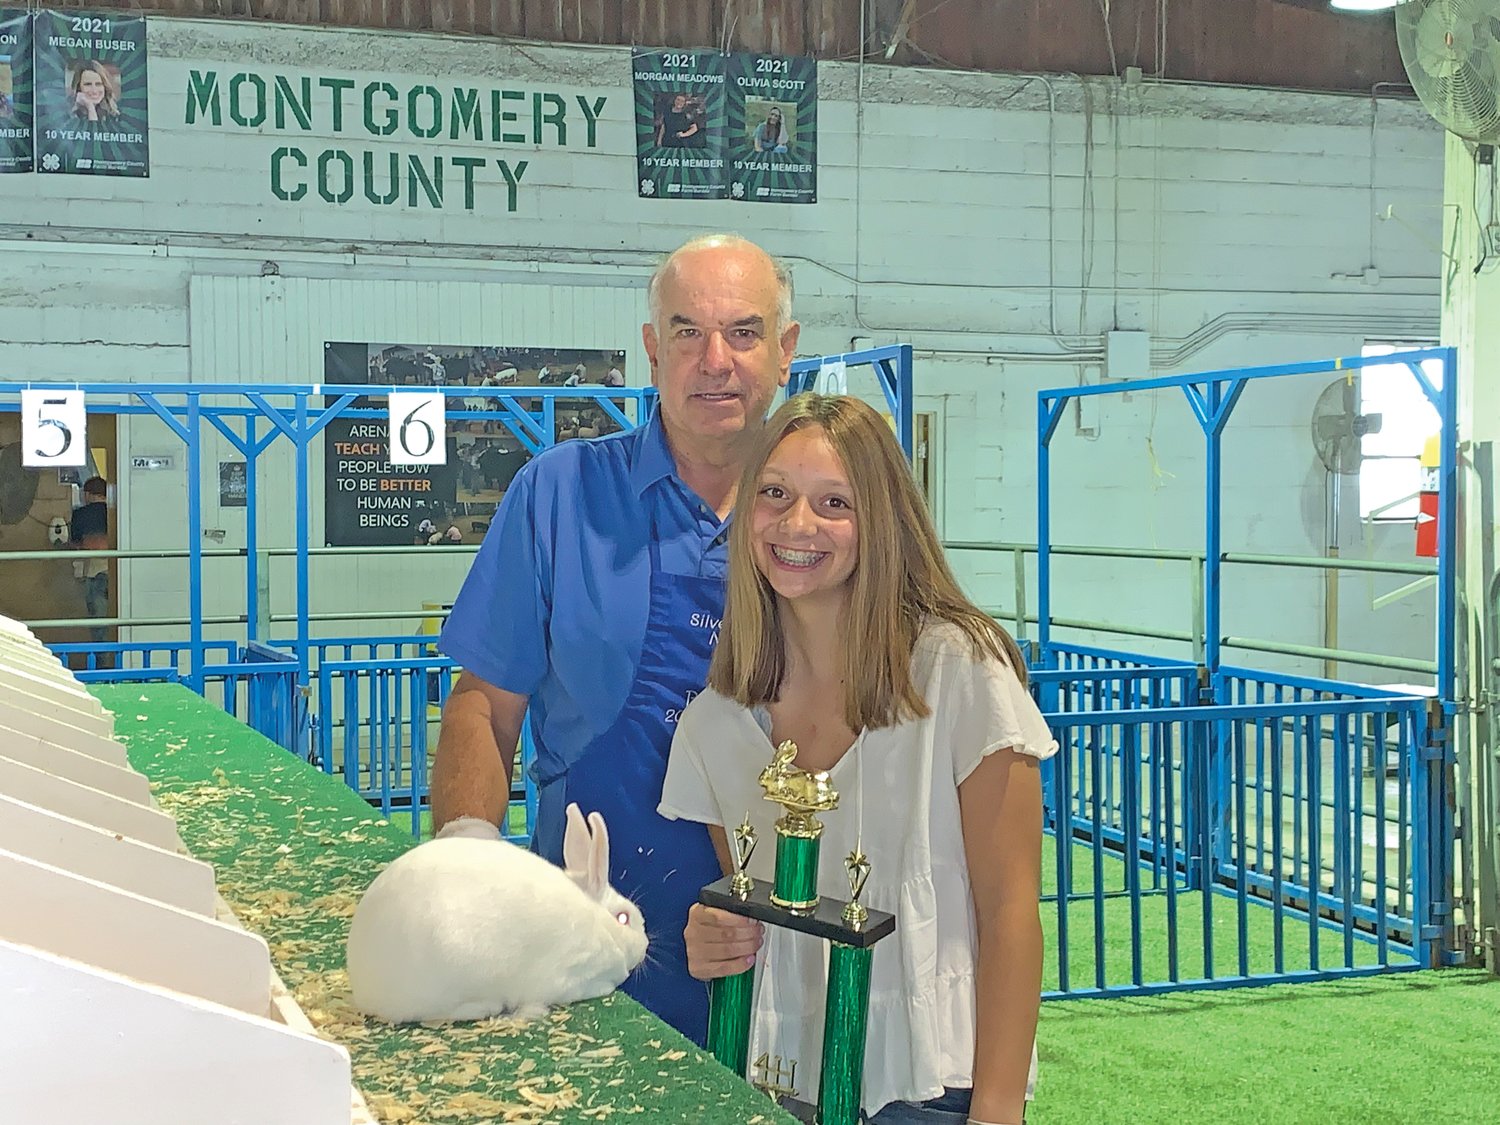 Peyton Page stands with her grand champion rabbit following the 4-H rabbit show at the Montgomery County Fairgrounds.